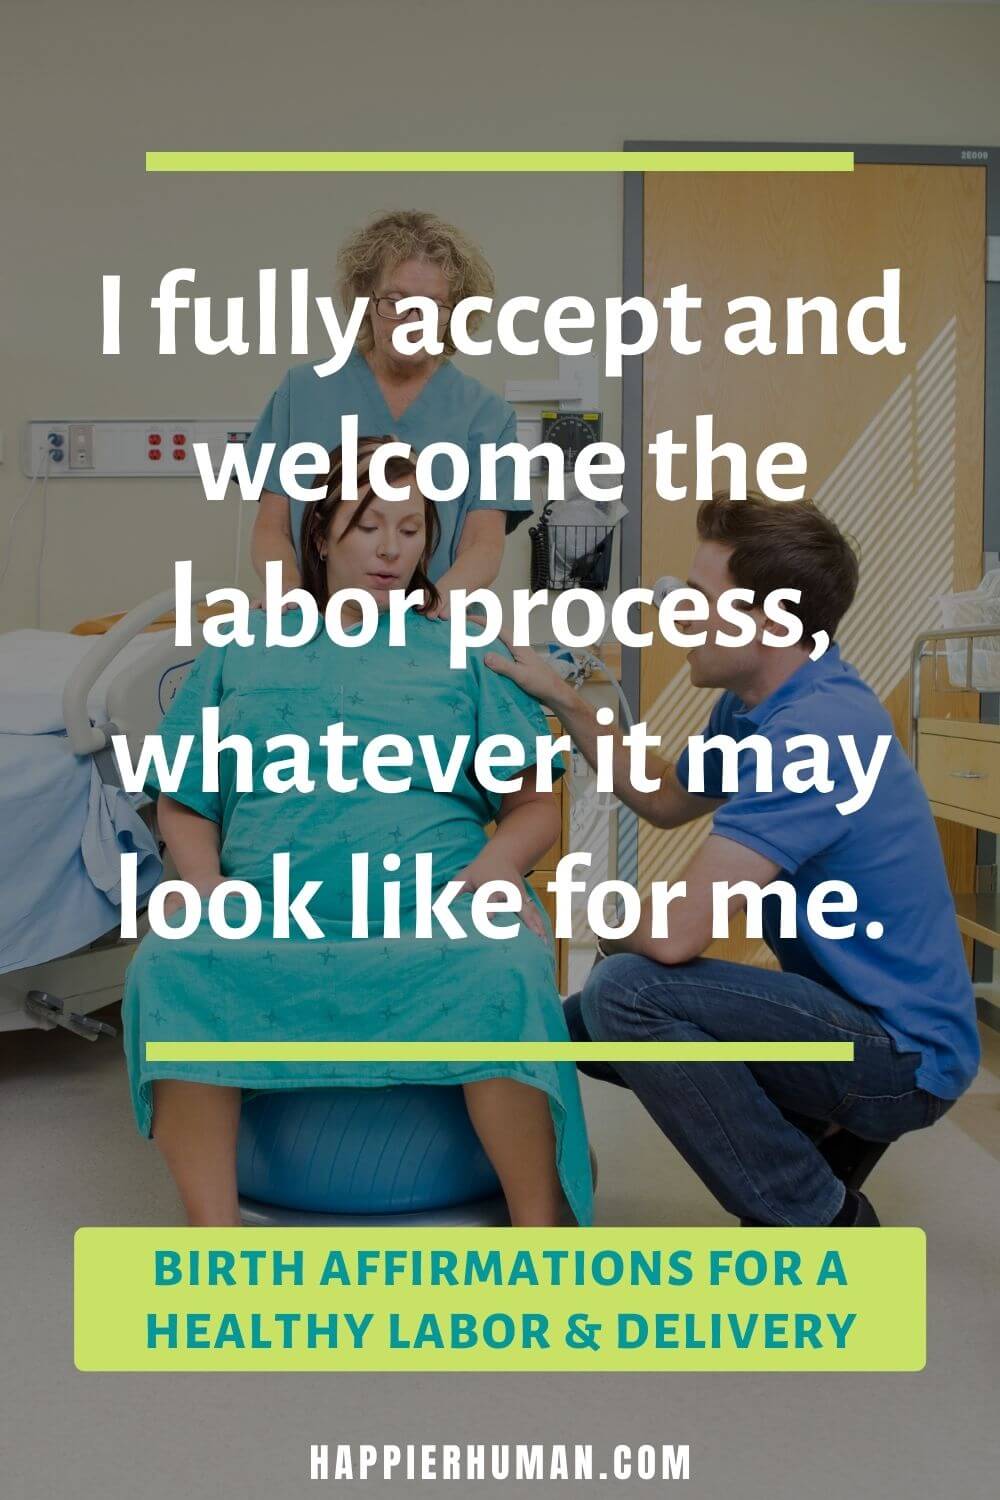 Birth Affirmations - I fully accept and welcome the labor process, whatever it may look like for me. | benefits of birth affirmations | birth affirmations pdf | christian birth affirmations